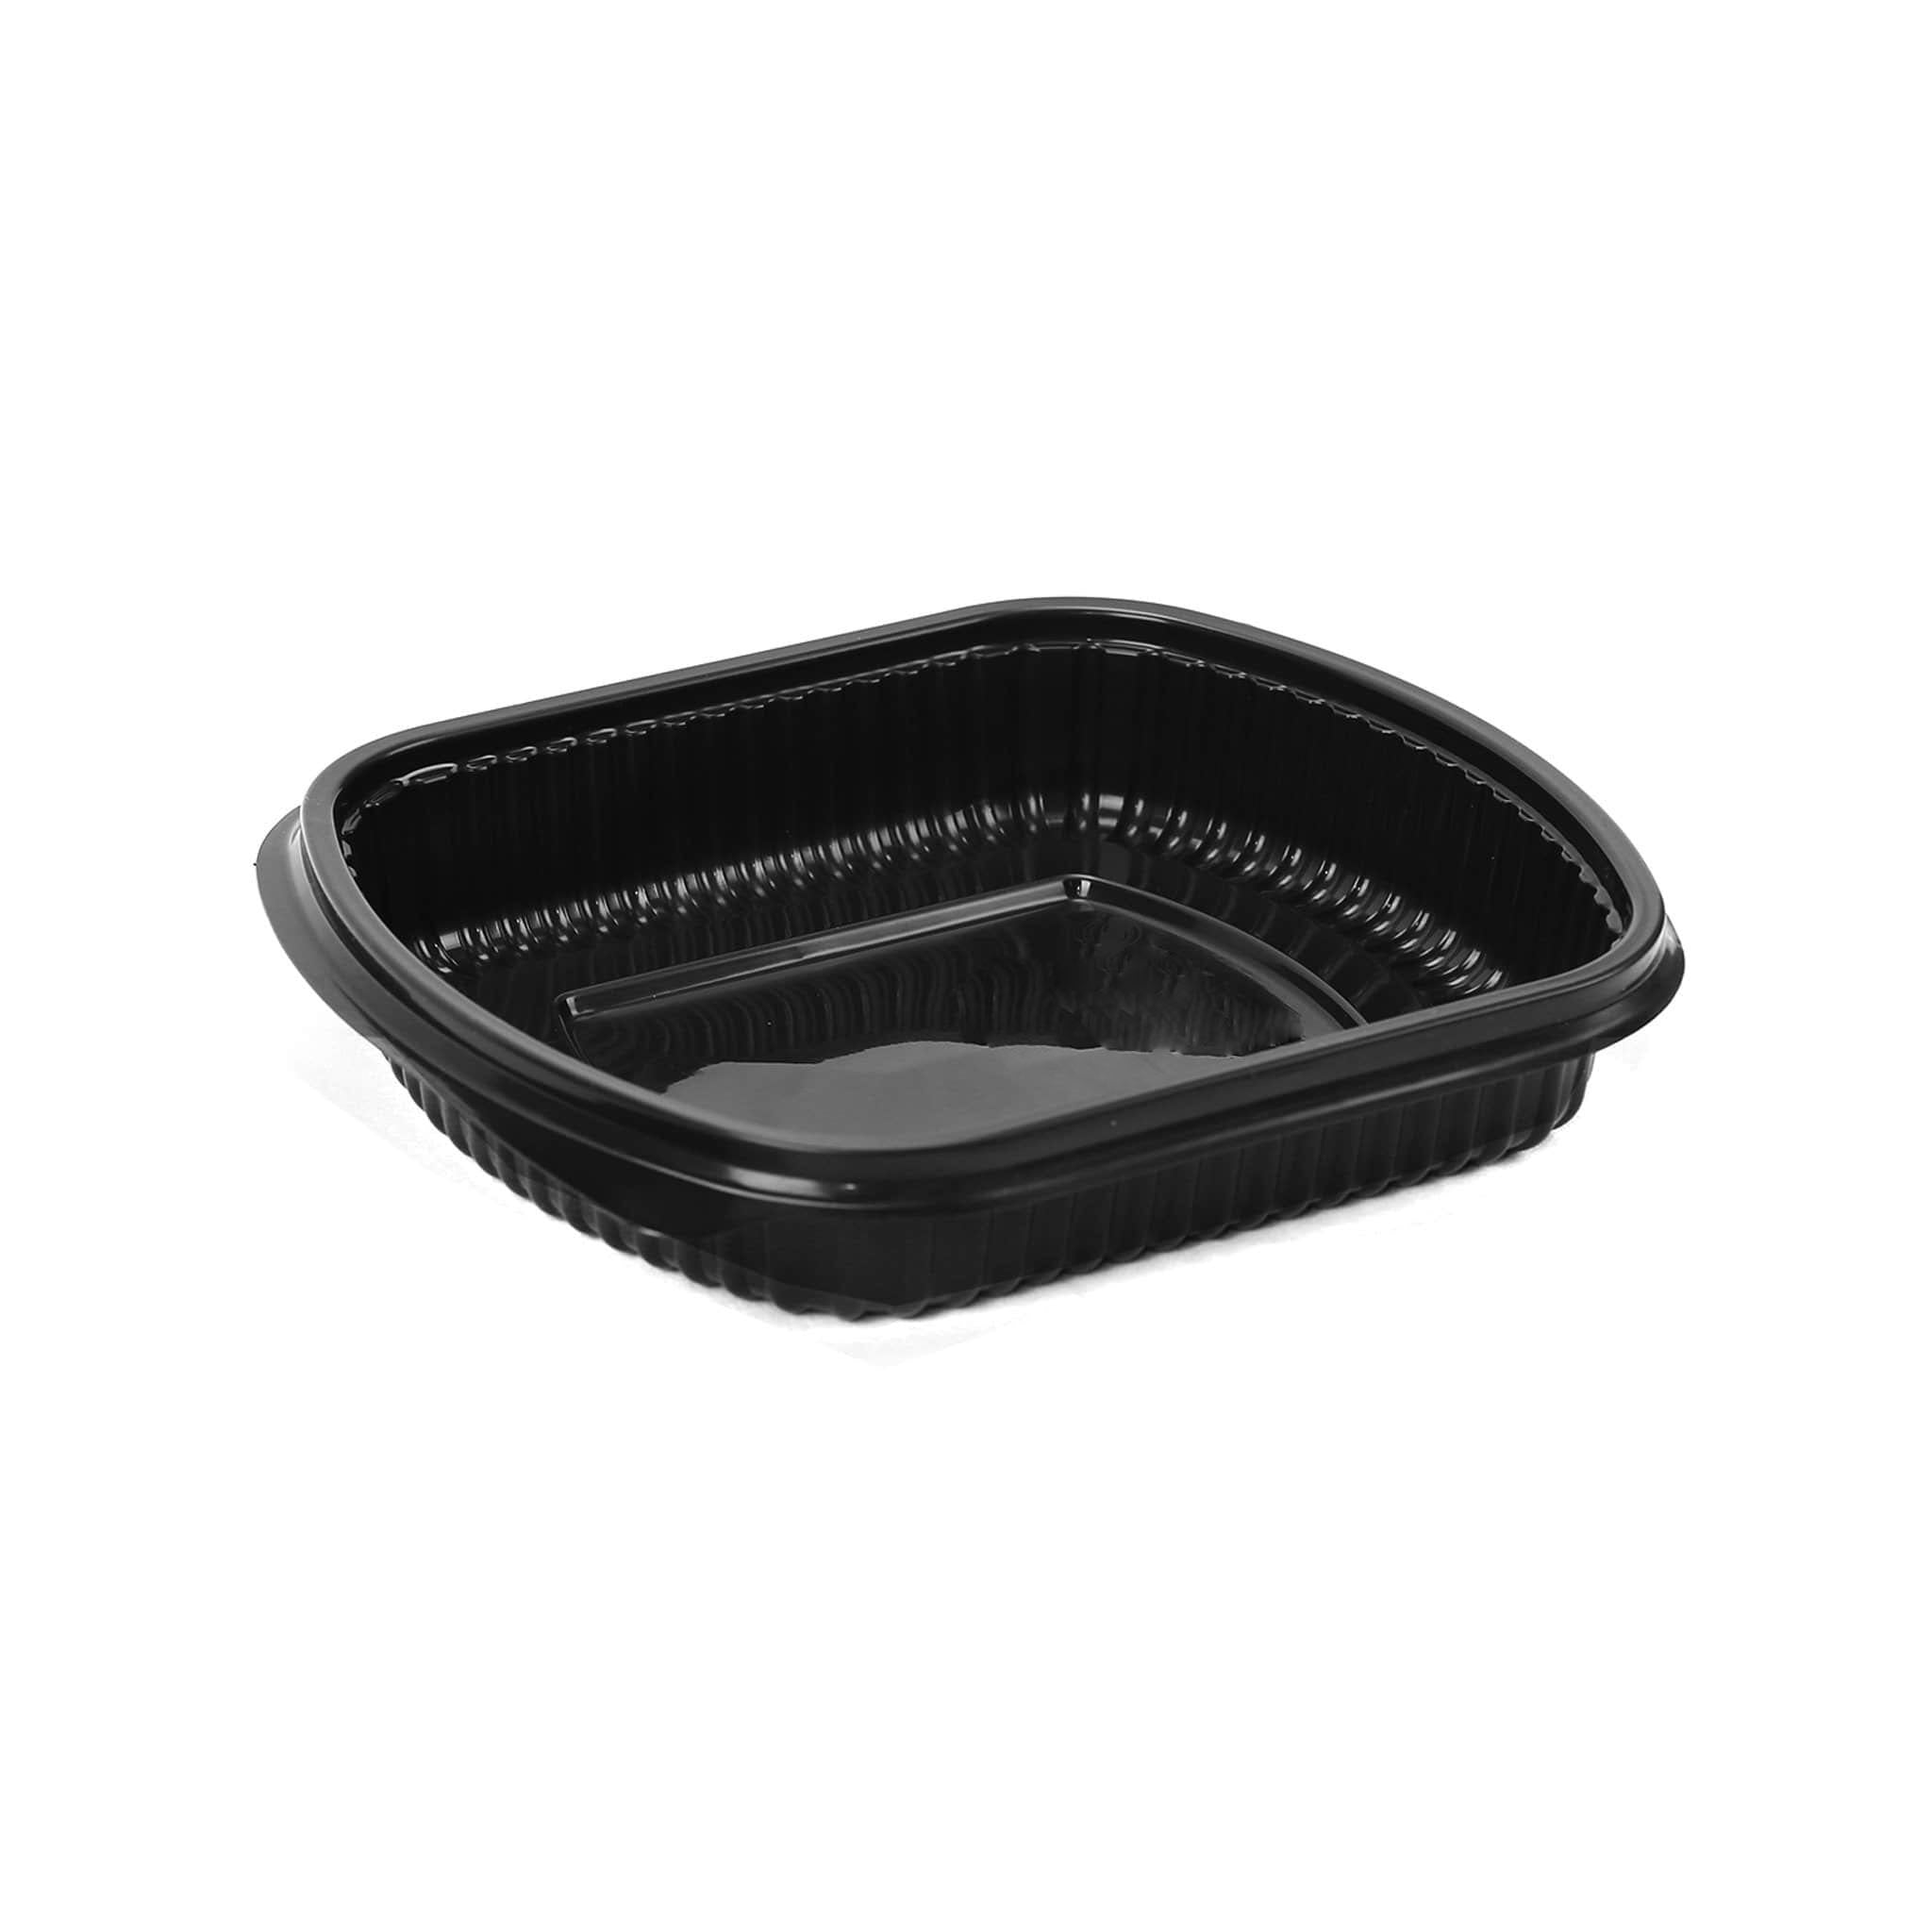 250 Pieces Black Base Rectangular Container With Lid- Hotpack